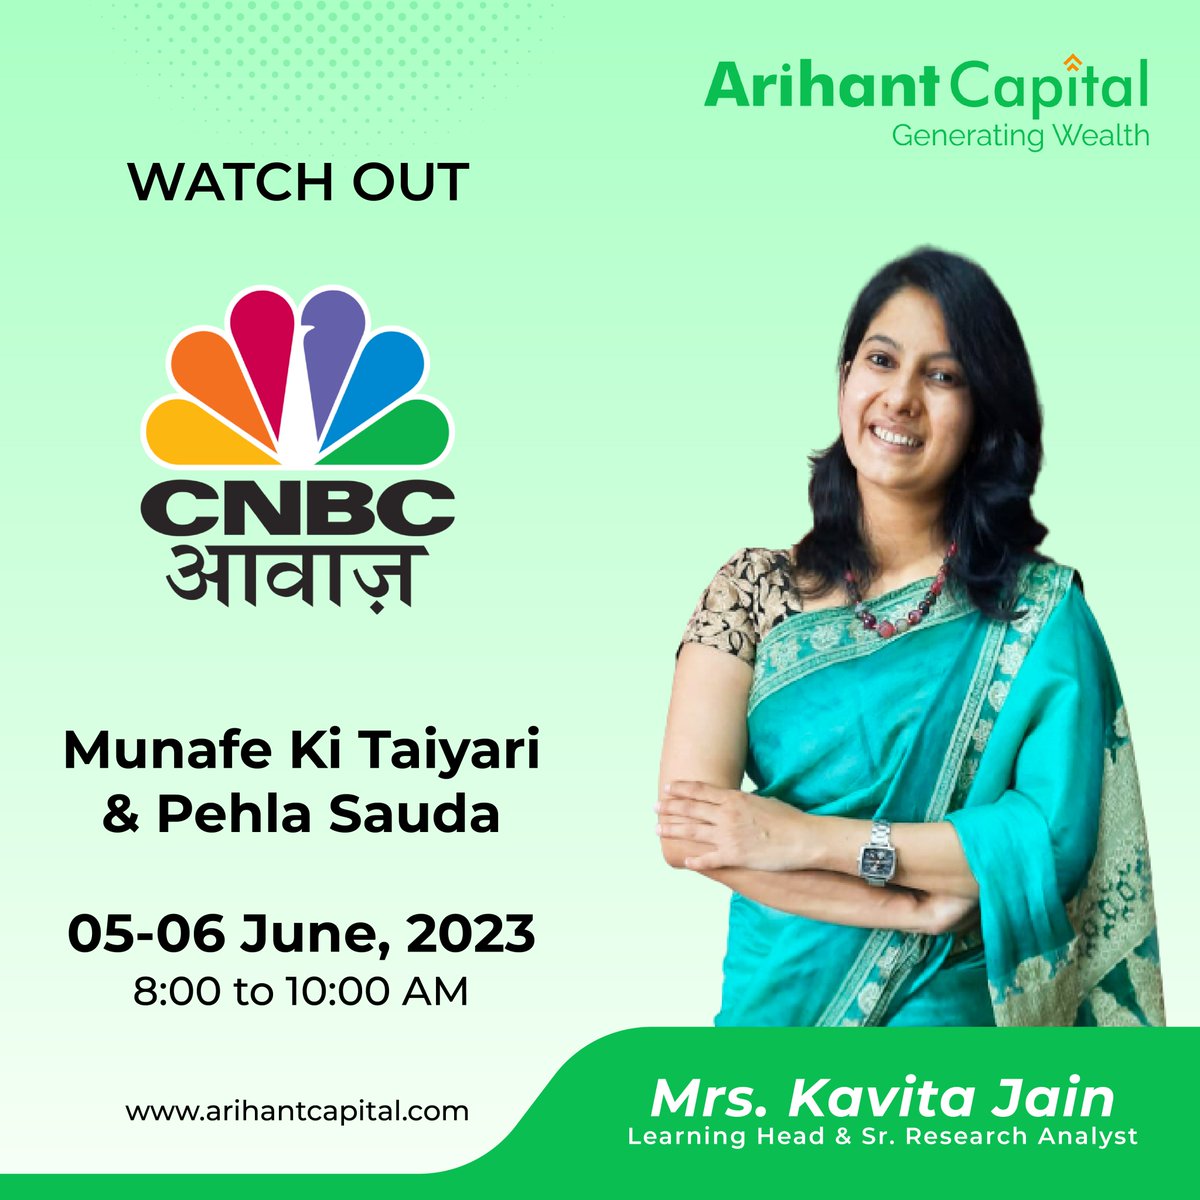 Join us #live on @CNBC_Awaaz. Watch out for #market and #stock outlook with Mrs Kavita Jain - Learning Head & Sr. Research Analyst, Arihant Capital. Find the Weekly Schedule show #MunafeKiTaiyari & #PehlaSauda

Start trading now:  bit.ly/3LNfMwE

#Research #Investment